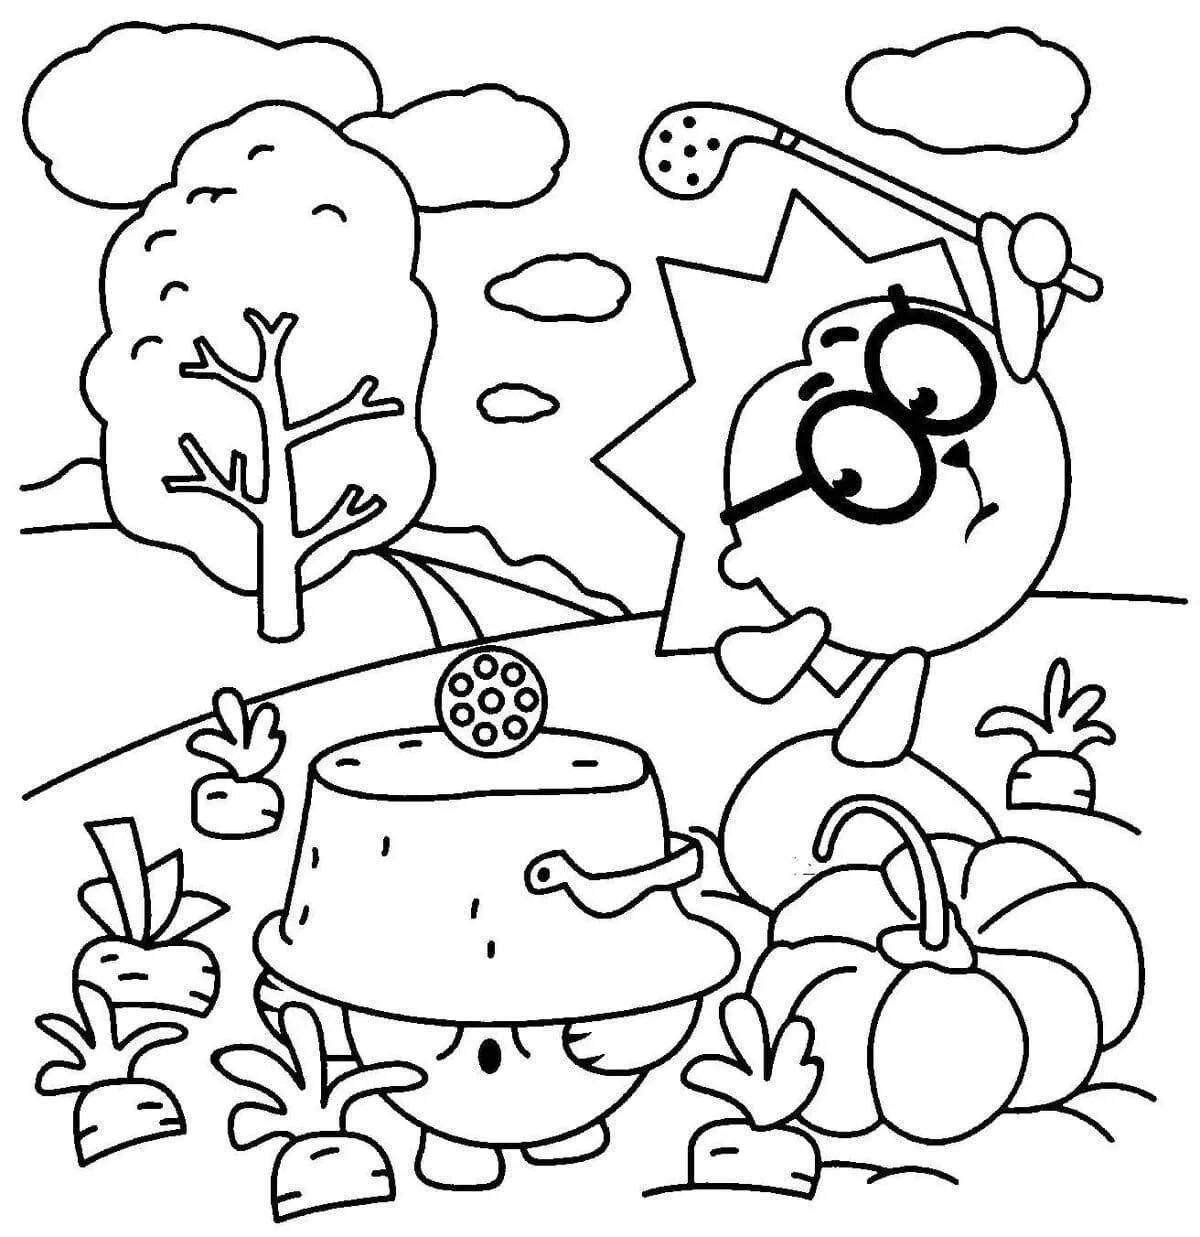 Color-frenzy coloring page for children 8-9 years old